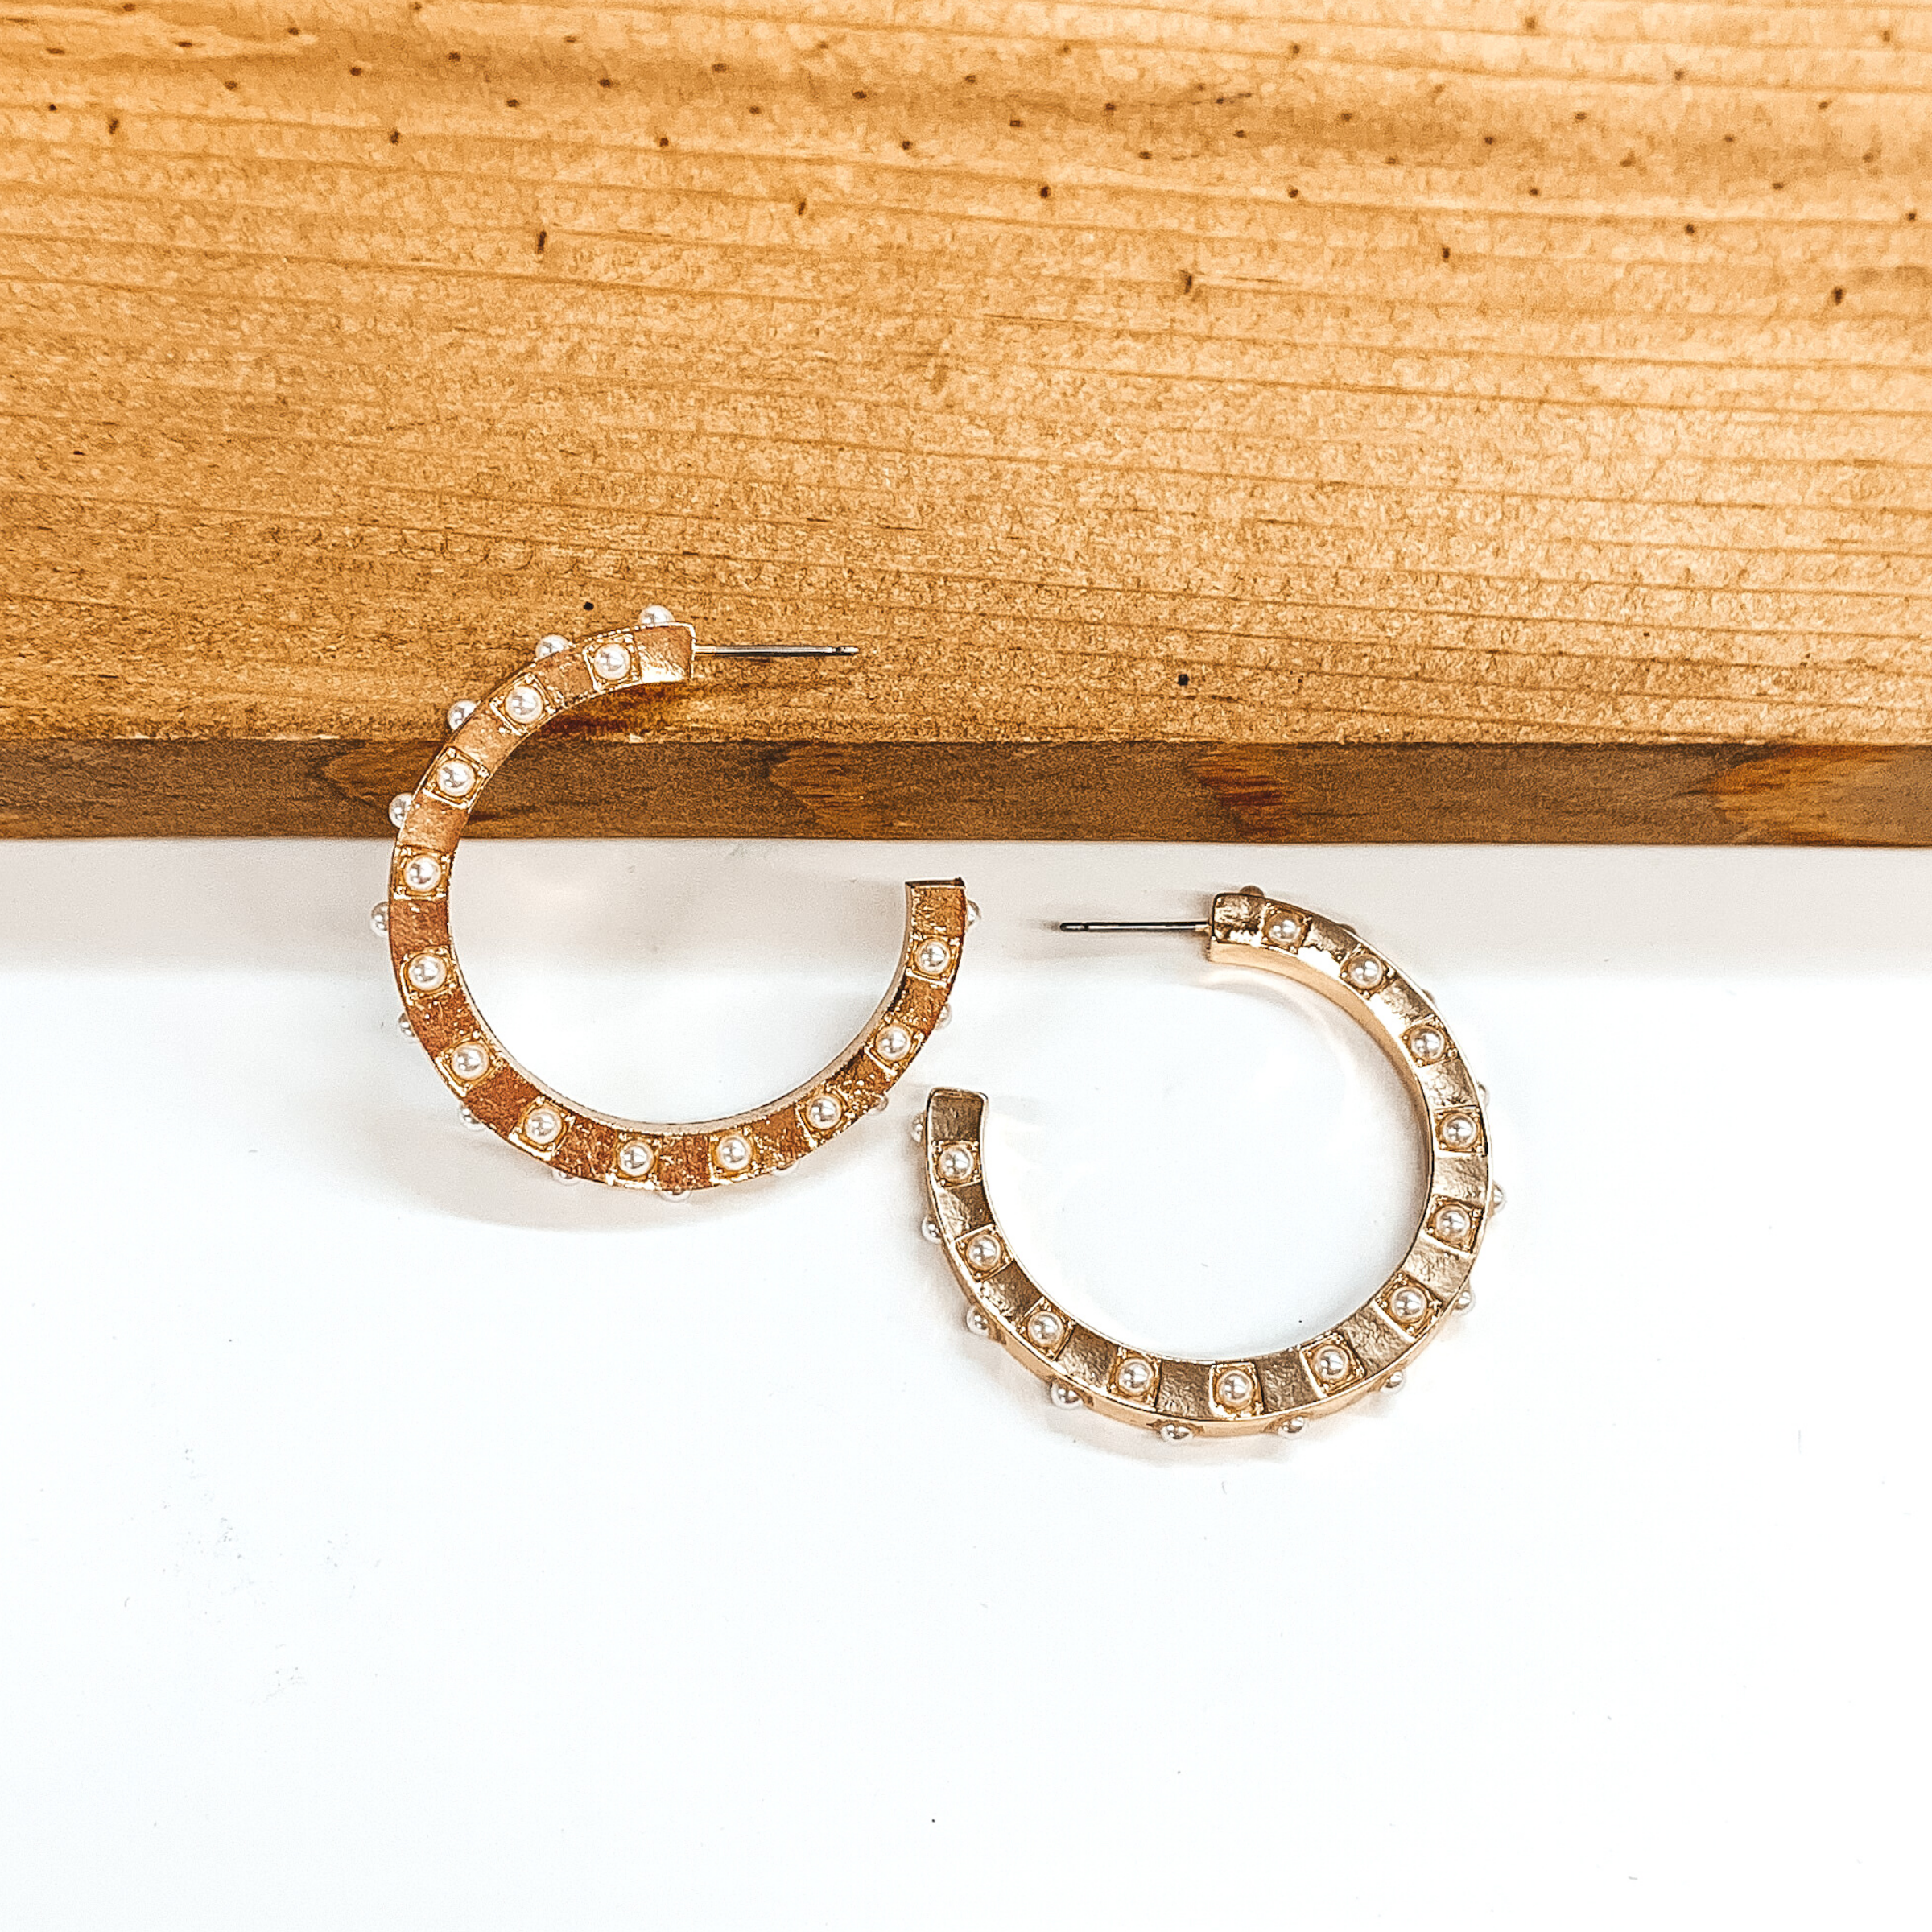 Gold hoop earrings with spaced out white pearls. One earrings is pictured laying on a brown block while the other earrings is pictured laying flat on the white background.